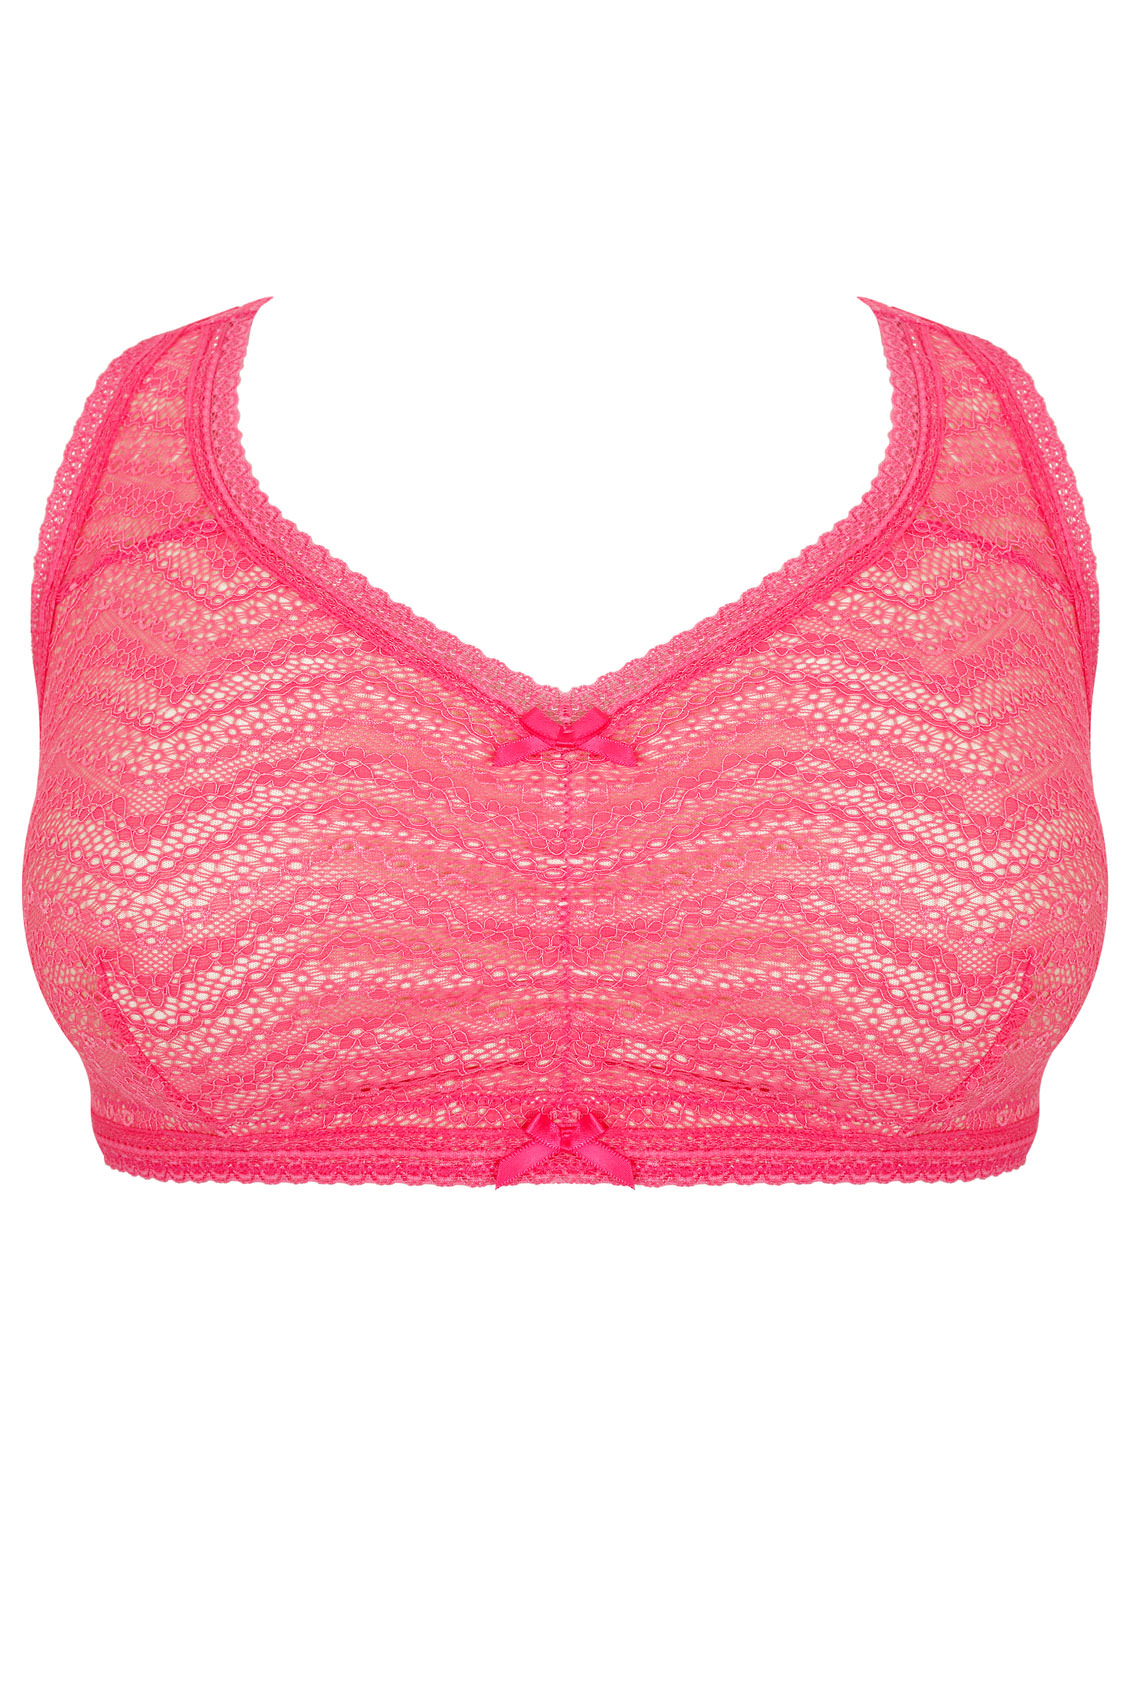 Nude And Hot Pink All Over Lace Racer Back Bralette Plus Size 14 To 32